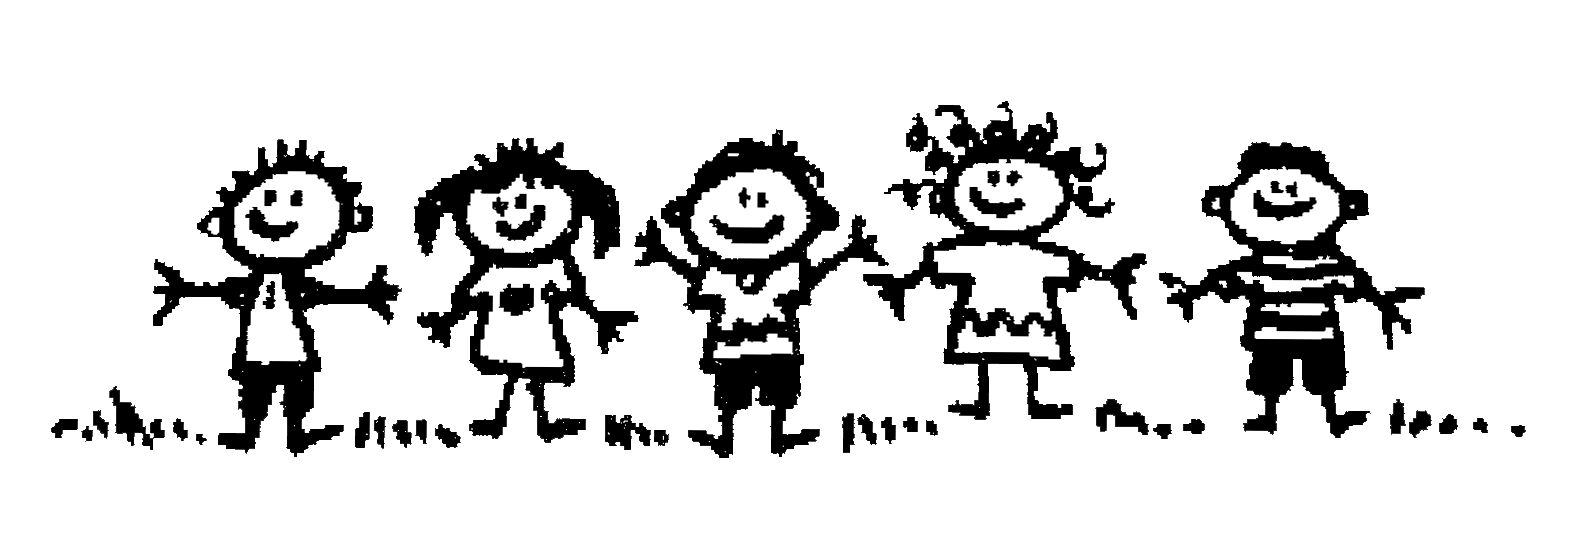 Welcome to kindergarten clipart black and white